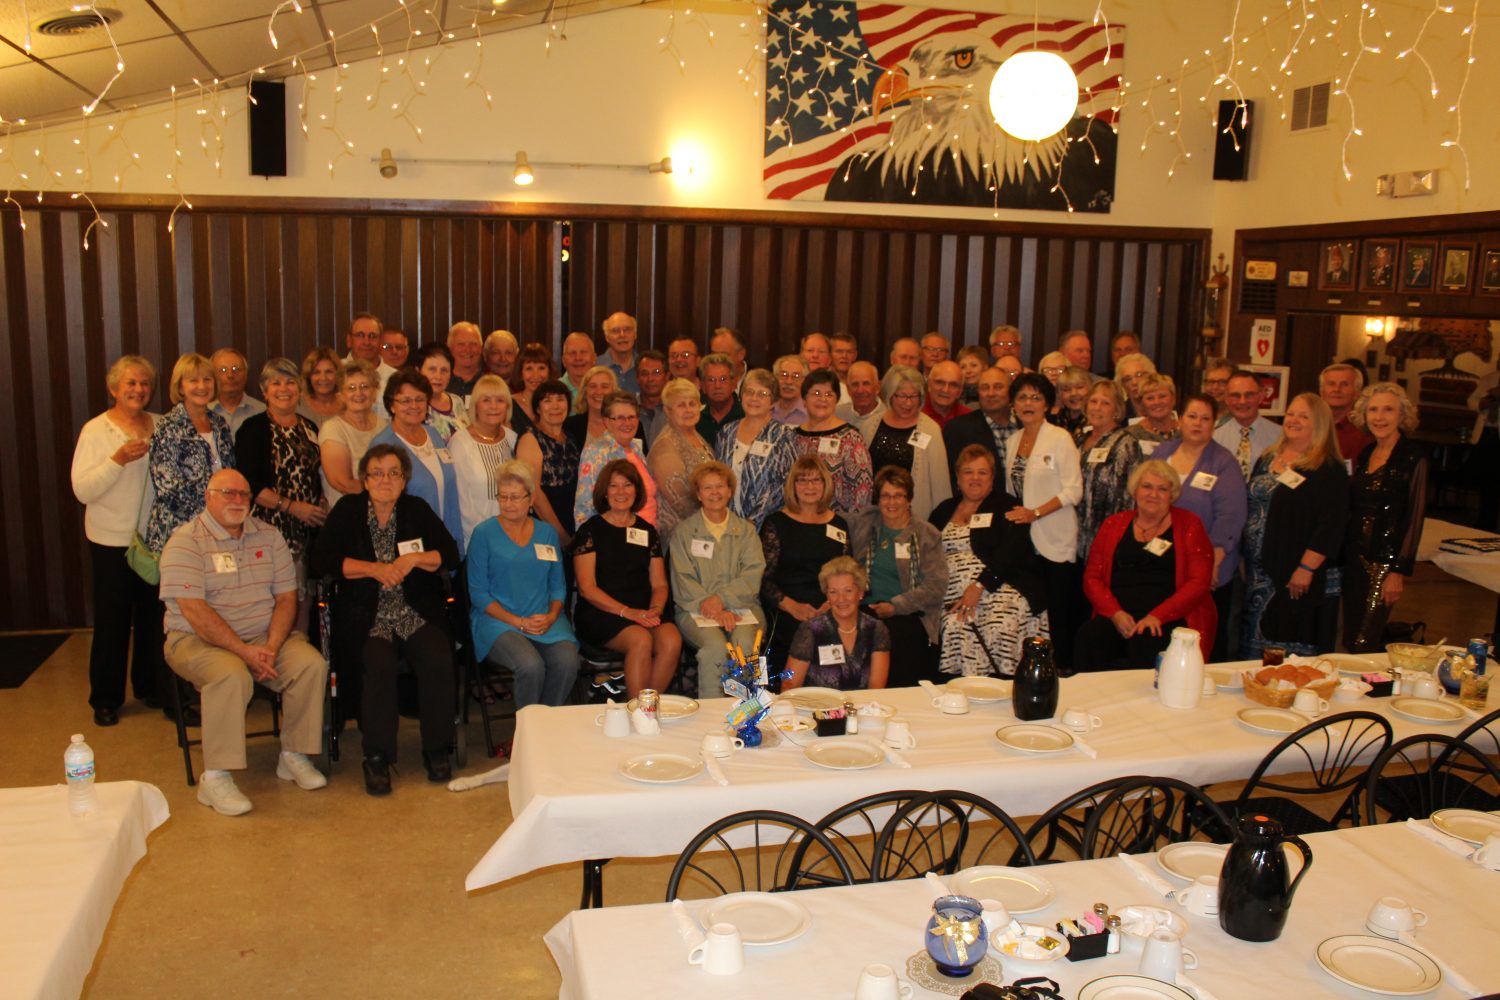 76 members attended the Columbus High School class of 1966 50-year reunion, held Sept. 15-18. Submitted photo.